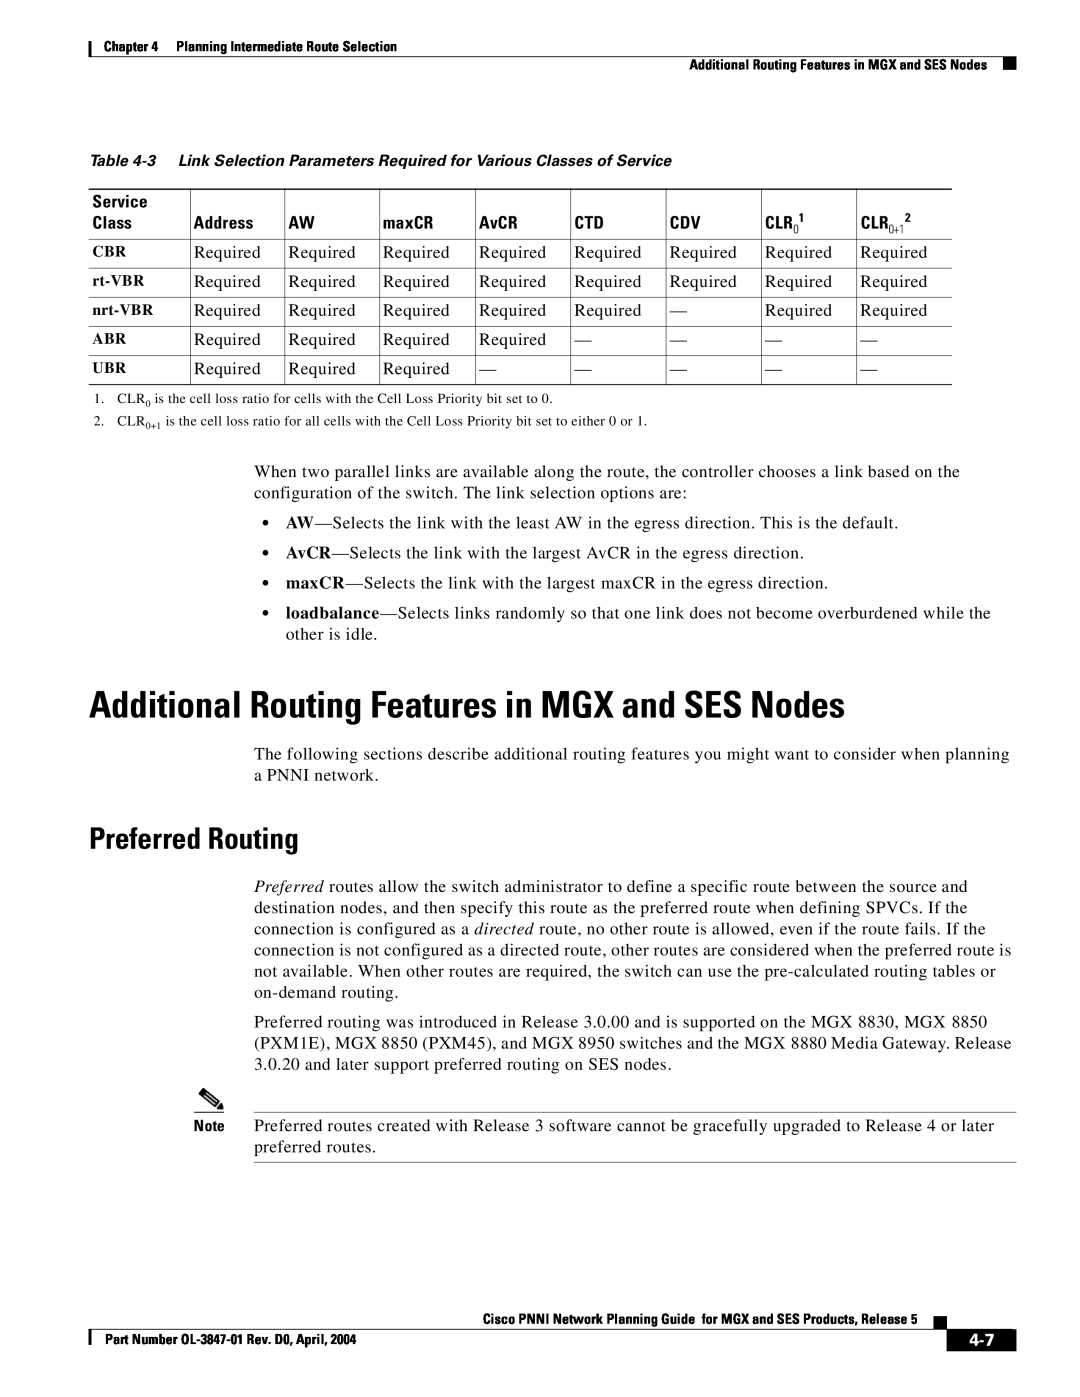 Cisco Systems Network Router manual Additional Routing Features in MGX and SES Nodes, Preferred Routing 